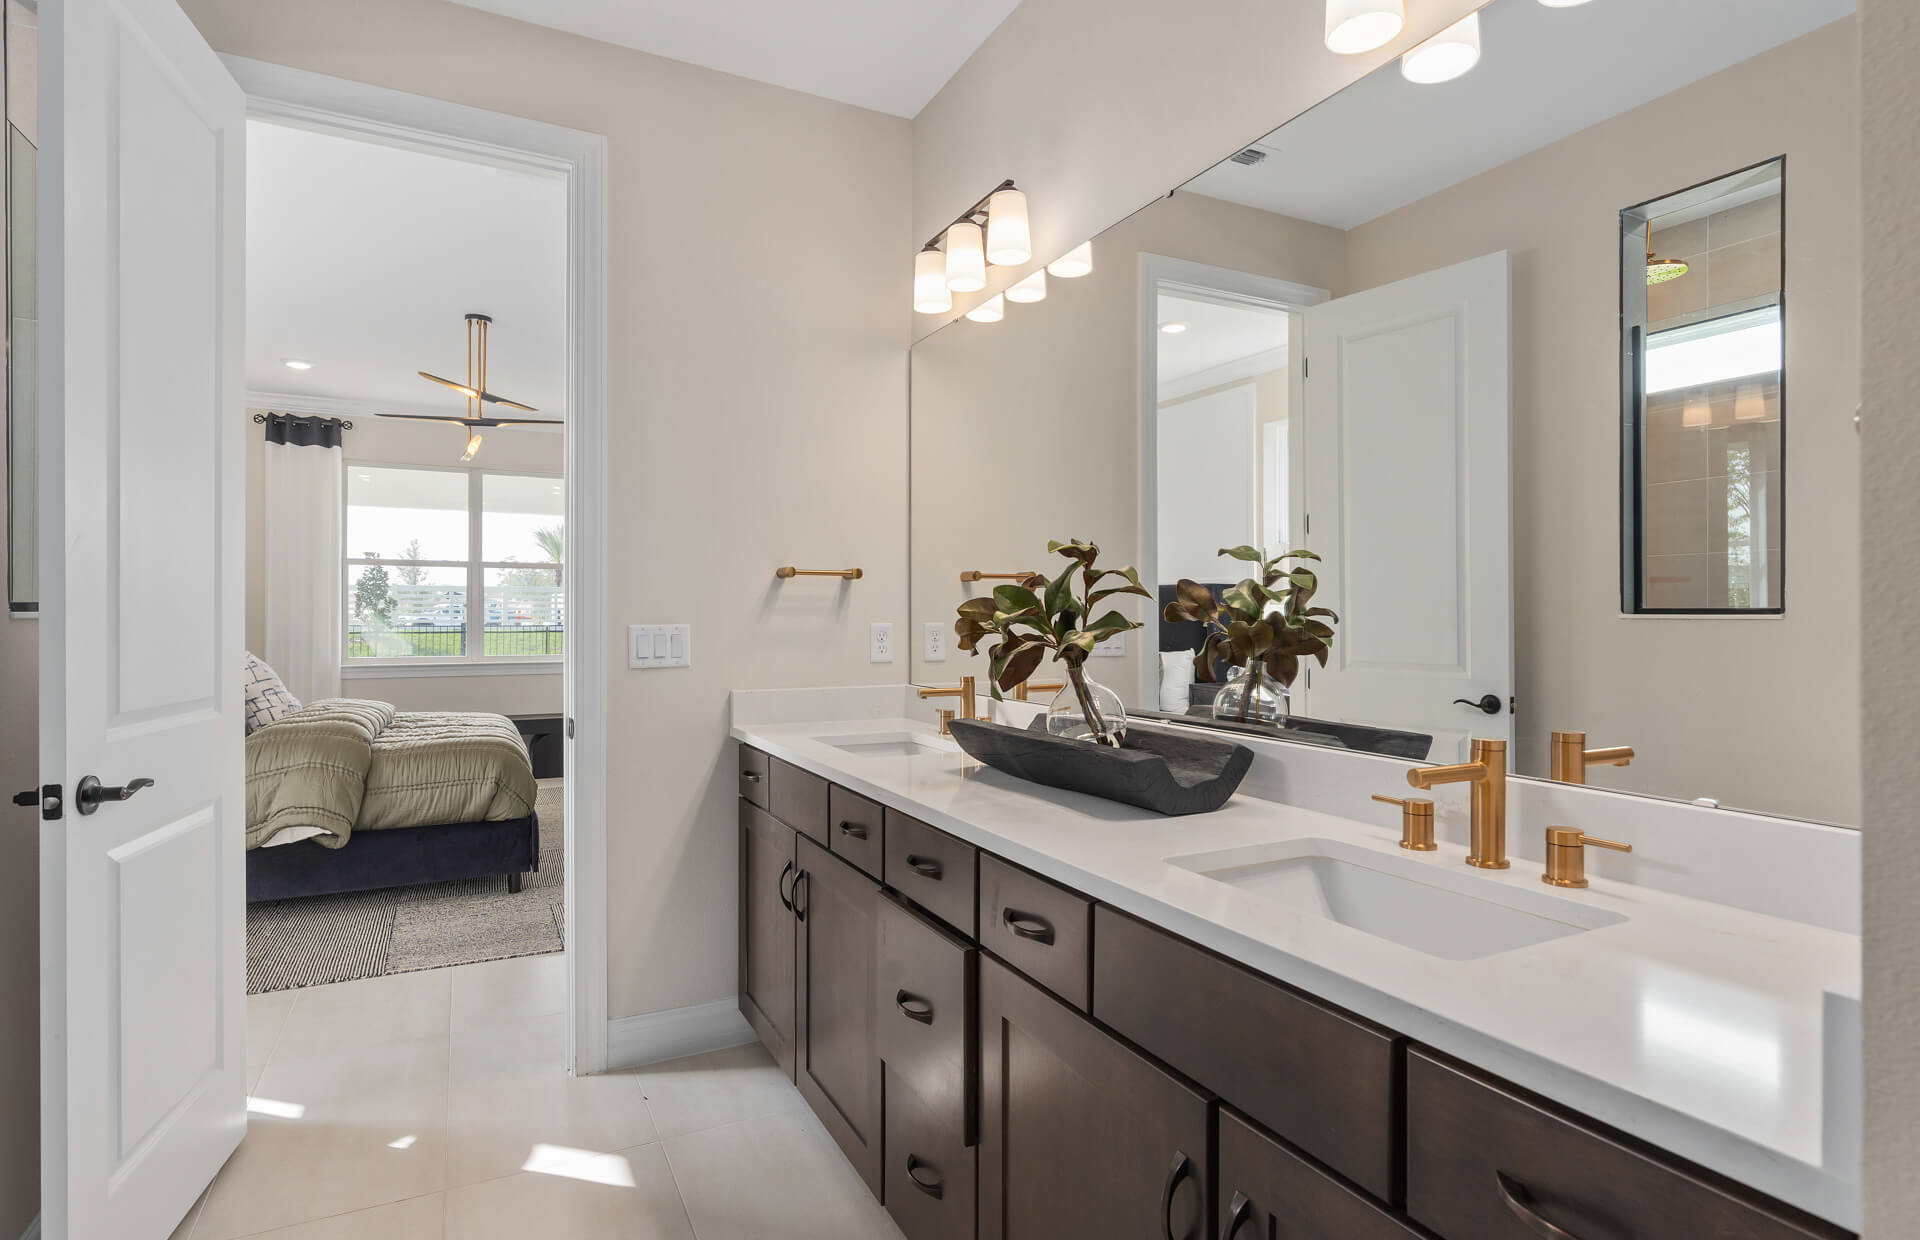 Image Gallery | EverBe by Pulte Homes in Orlando FL